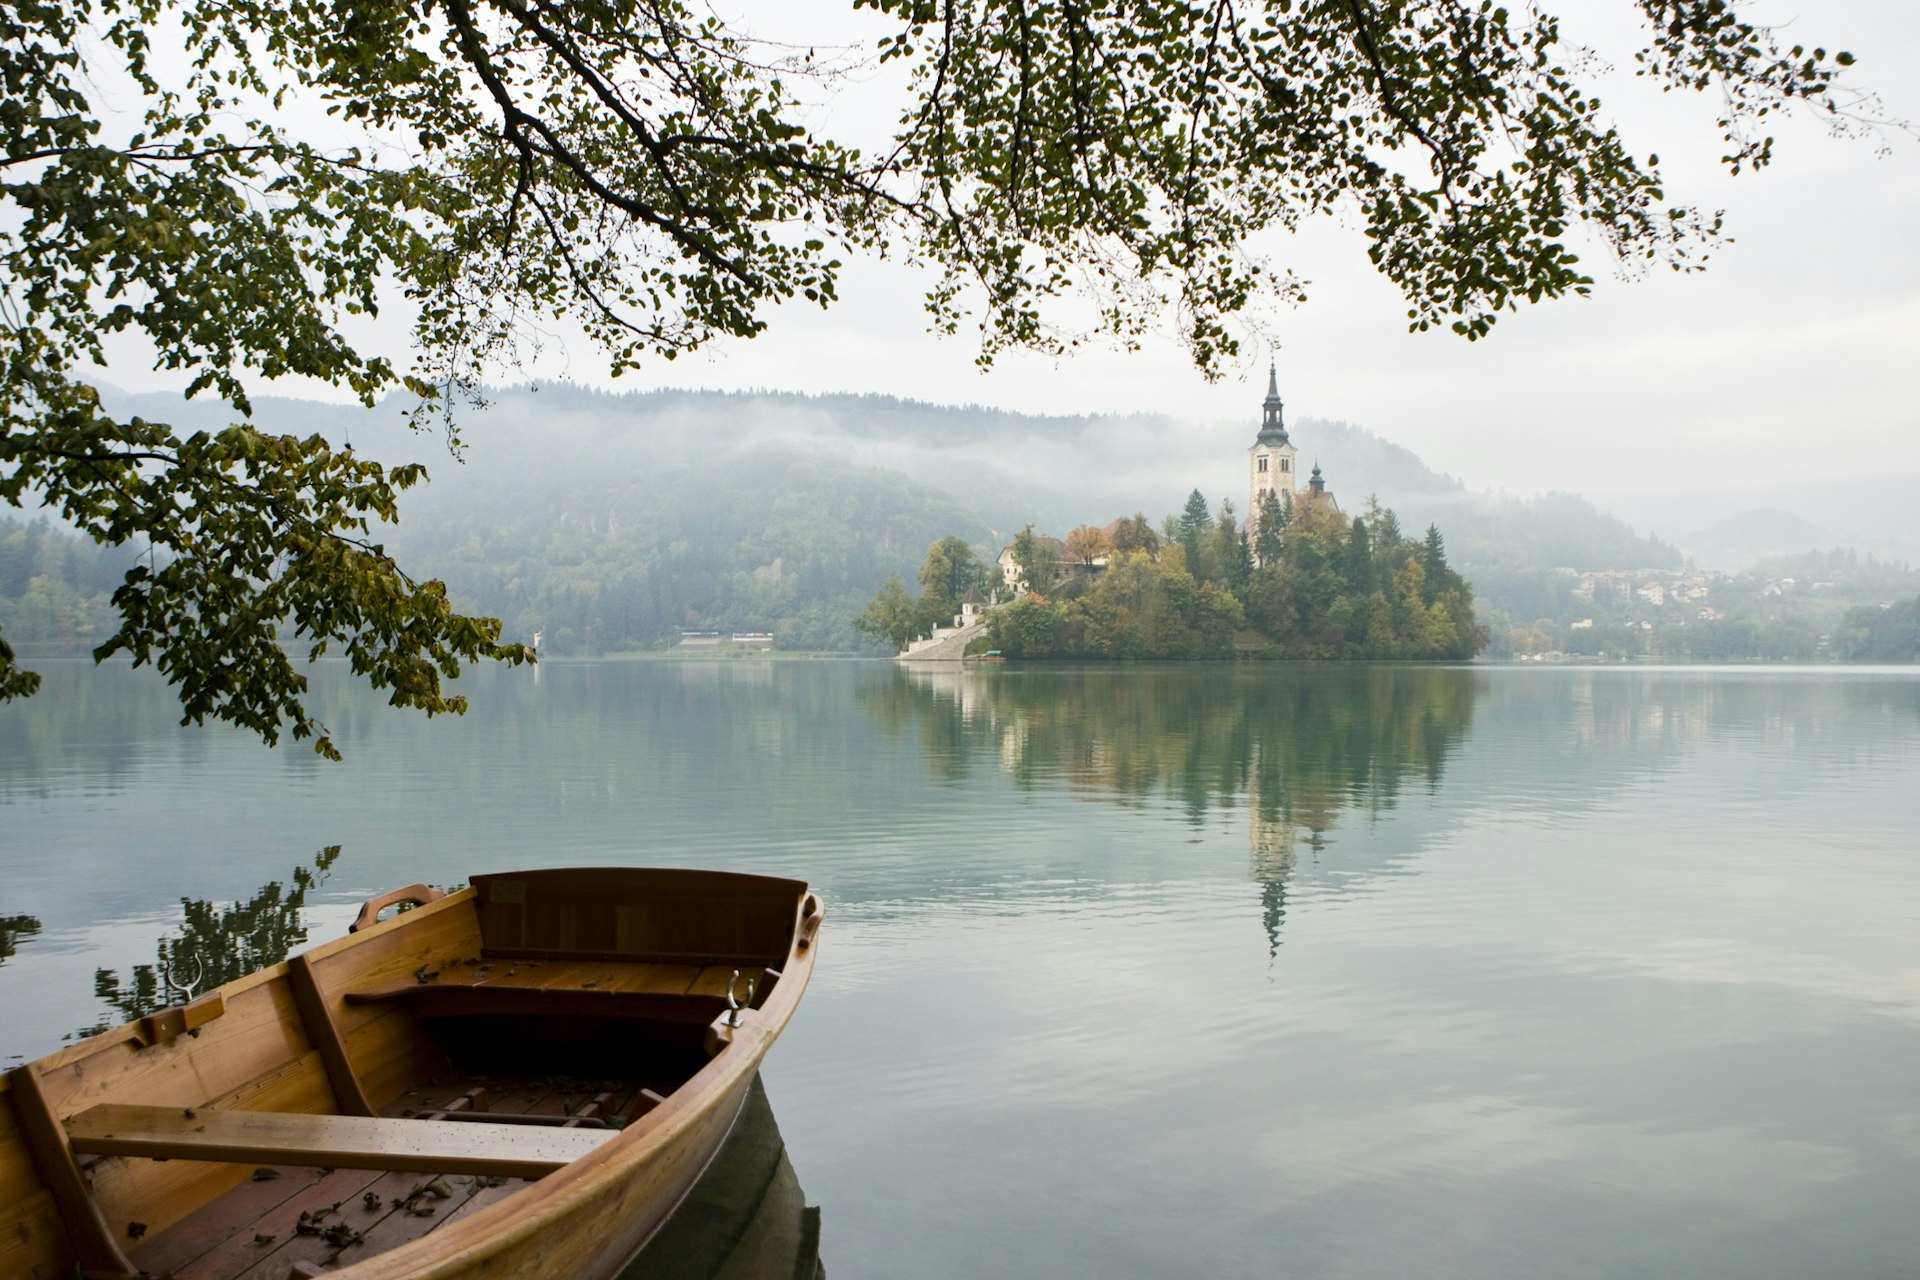 Boat and castle in Bled, Slovenia